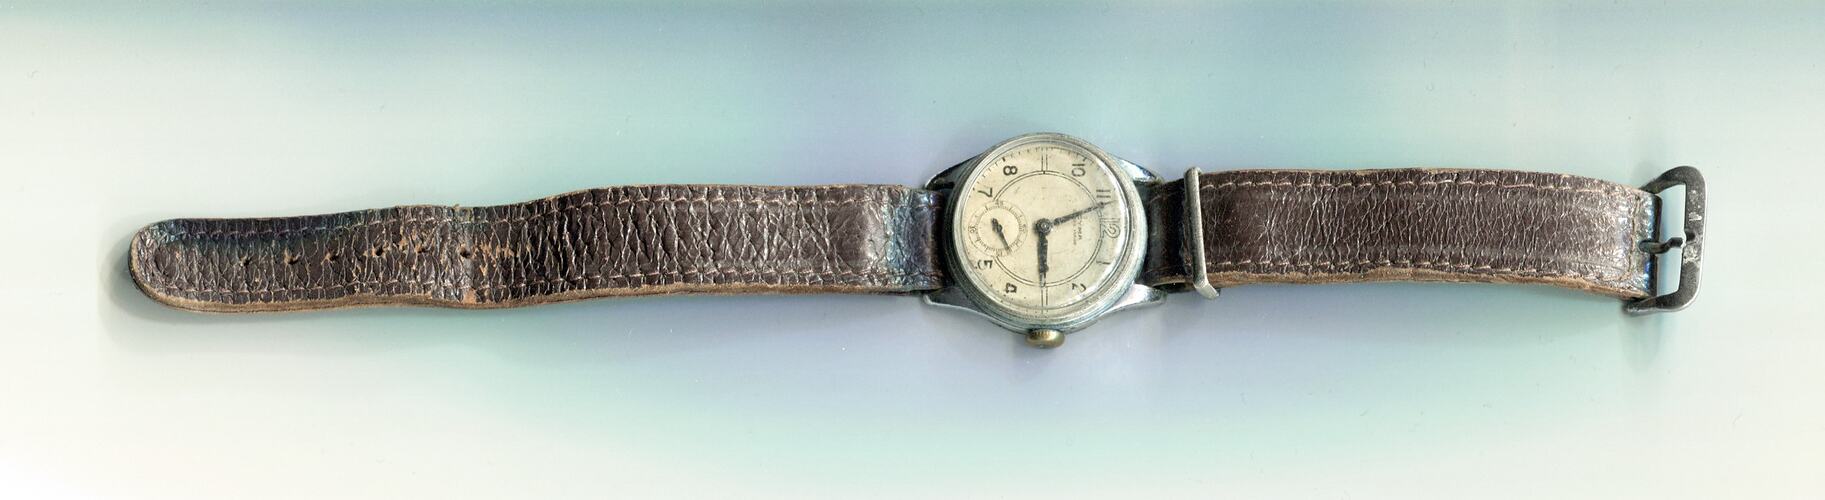 Wrist watch with brown wornleather band and white face,